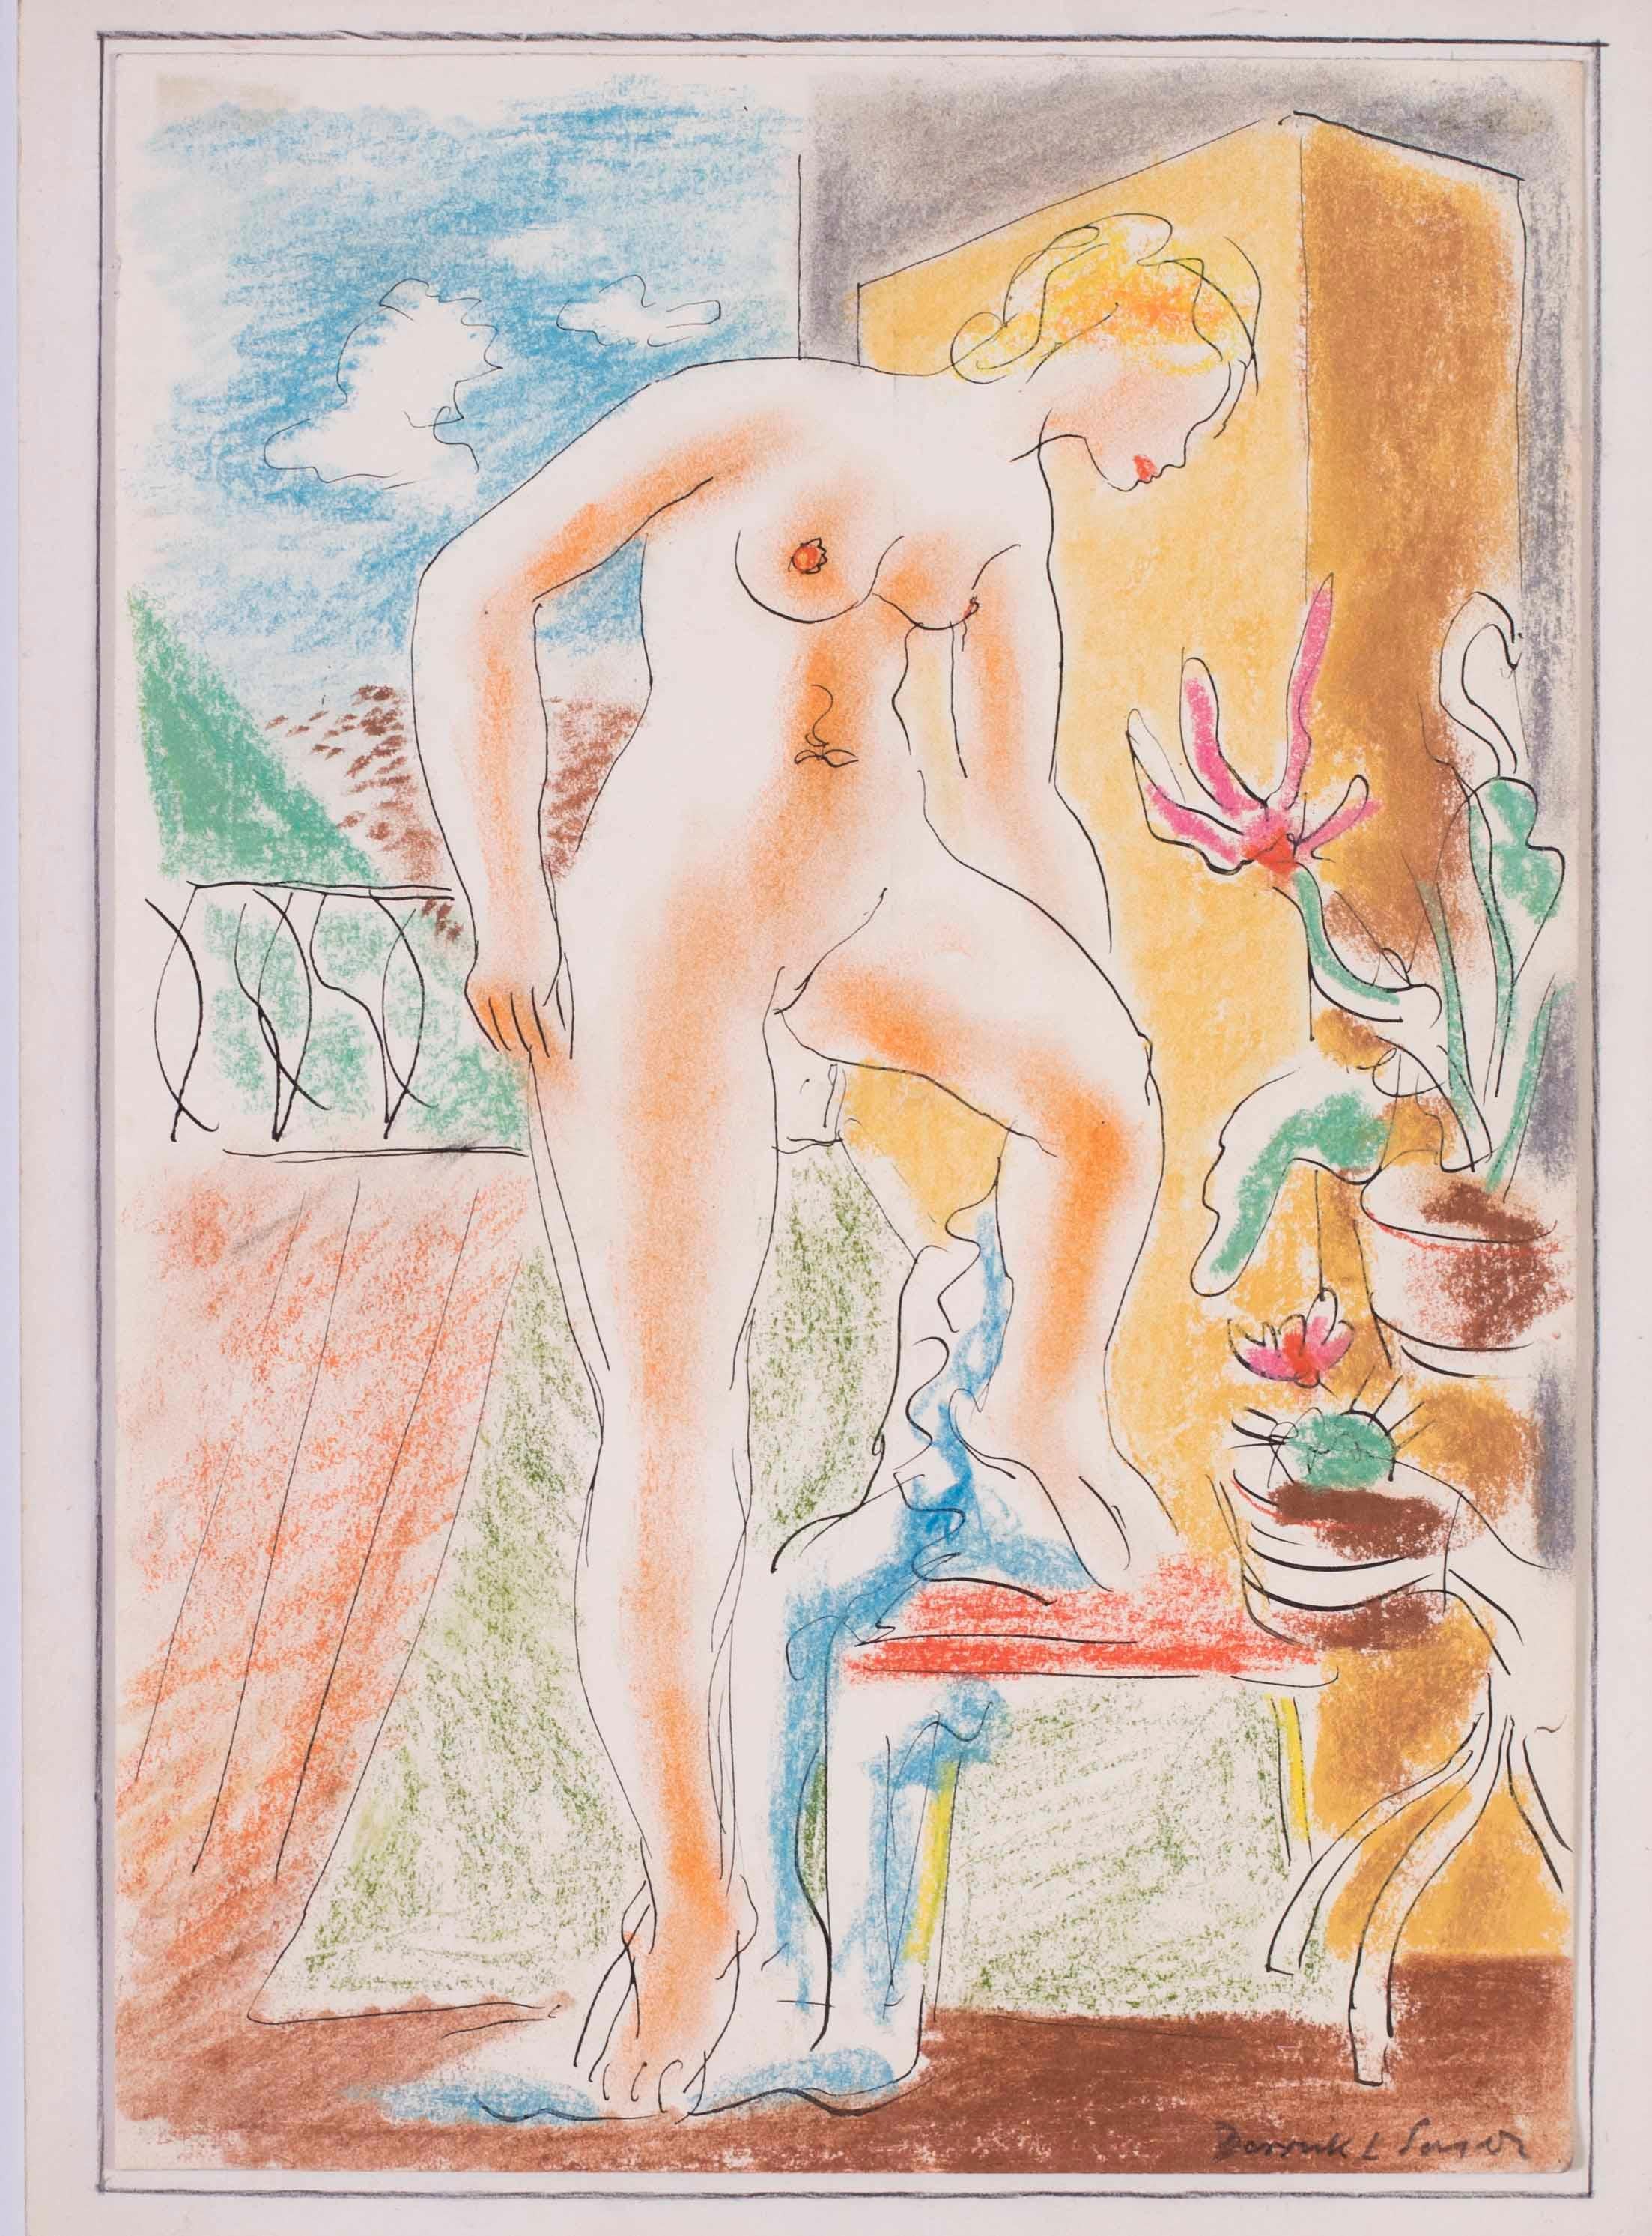 British Mid 20th Century ink and pastel on paper drawing of a bather, nude - Art by Derrick Latimer Sayer